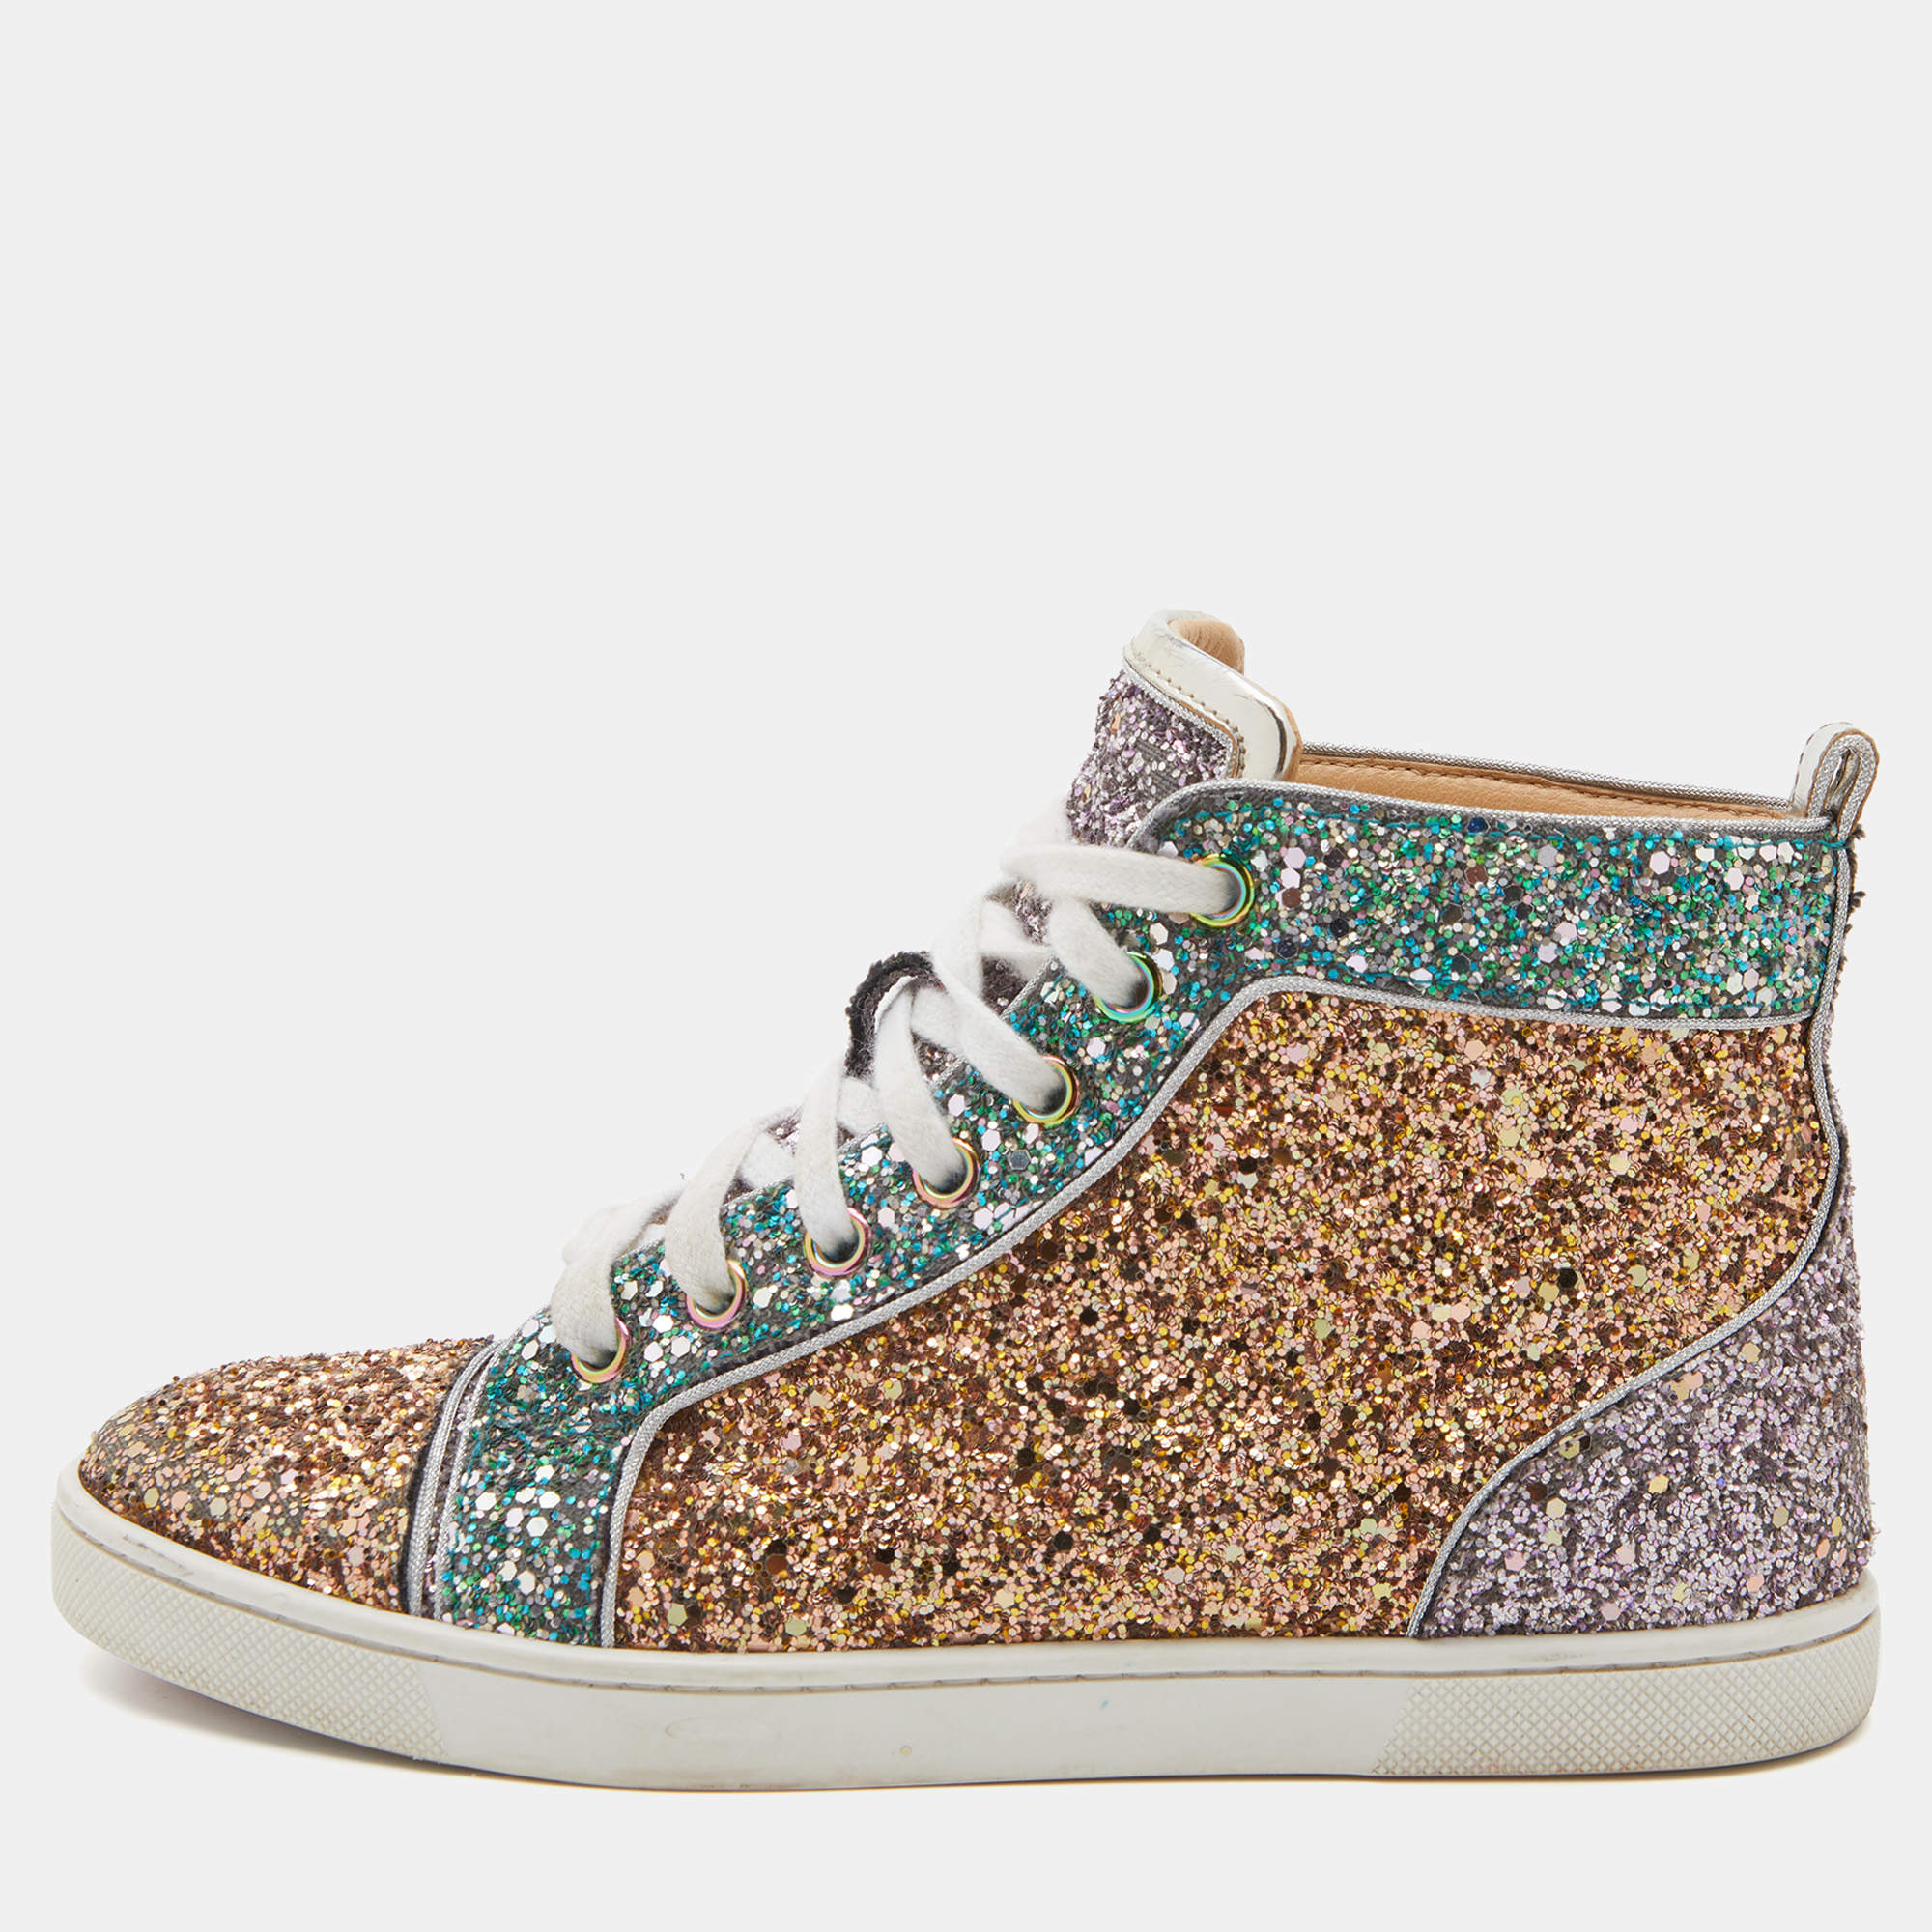 Christian Louboutin Multicolor Glitter Fabric Bip Bip High Top Sneakers Size 35.5